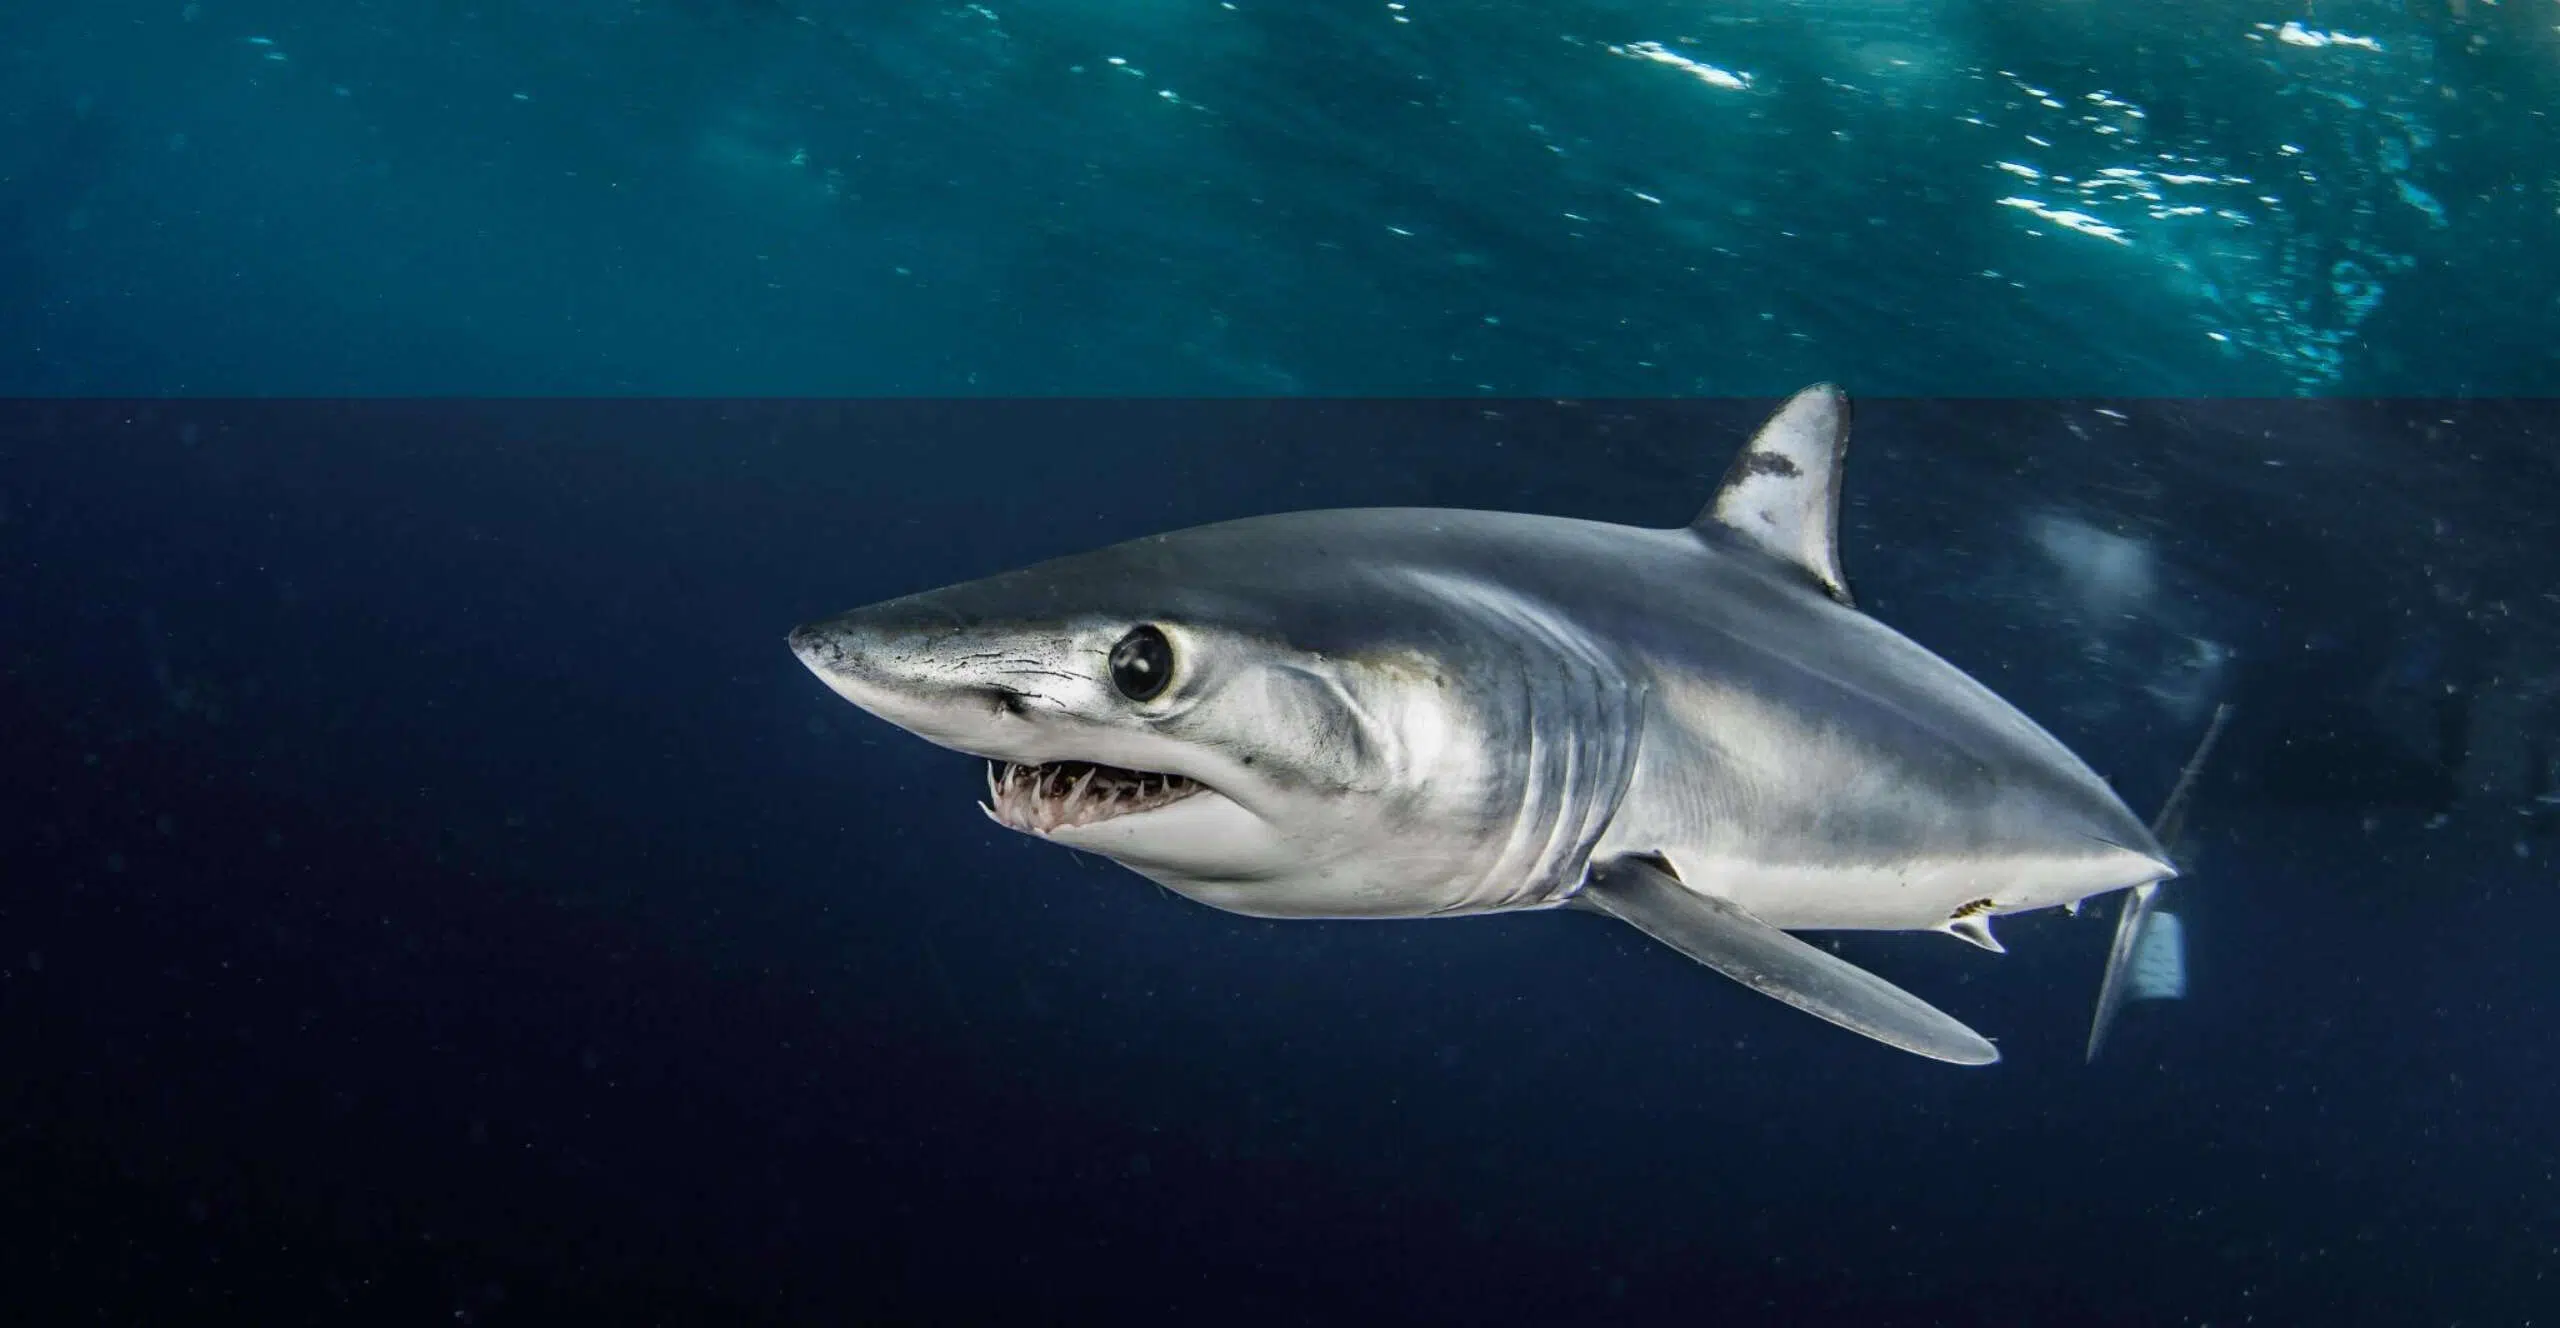 "Mako shark swimming near the surface out in the open ocean. This image was taken on a baited shark dive 50 kms offshore past Western Cape.https://www.gettyimages.com/search/photographer?photographer=Lindsay%20Maiko%20Pflum - Photo by wildestanimal at getty images"